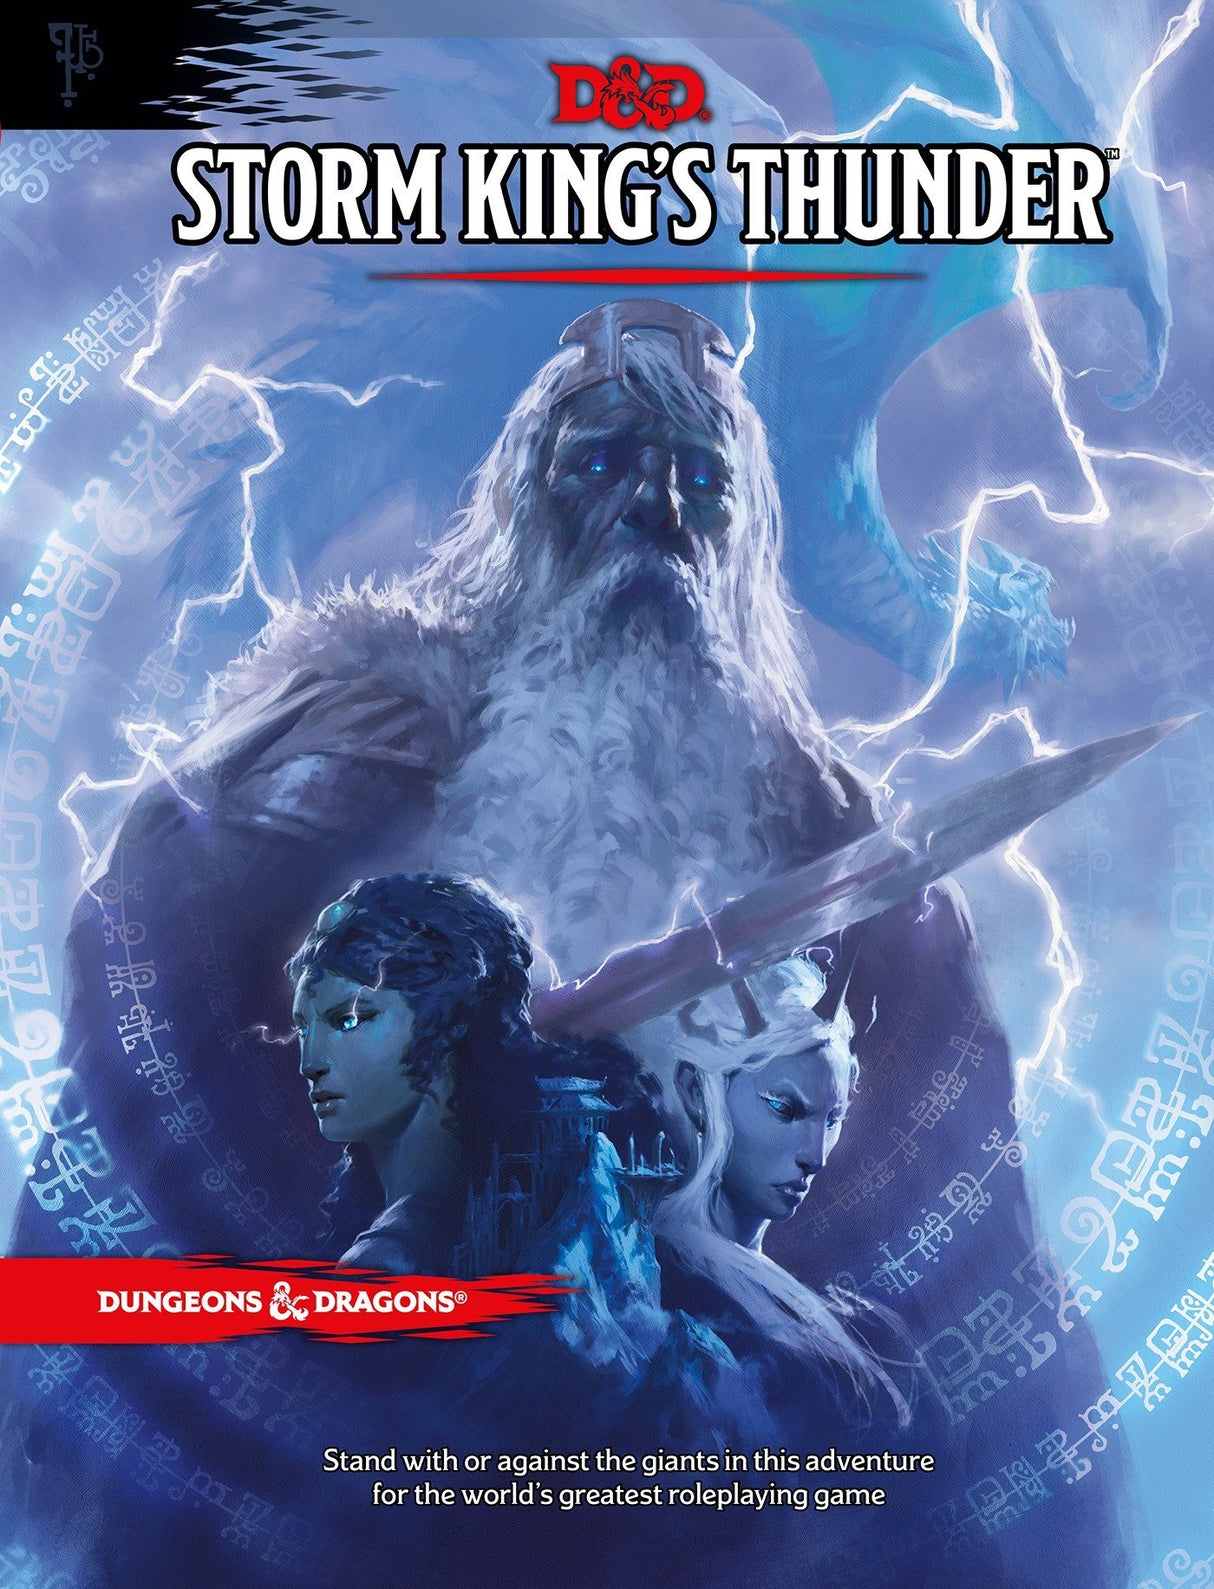 Dungeons & Dragons Storm Kings Thunder Hardcover Wizards of the Coast DUNGEONS & DRAGONS